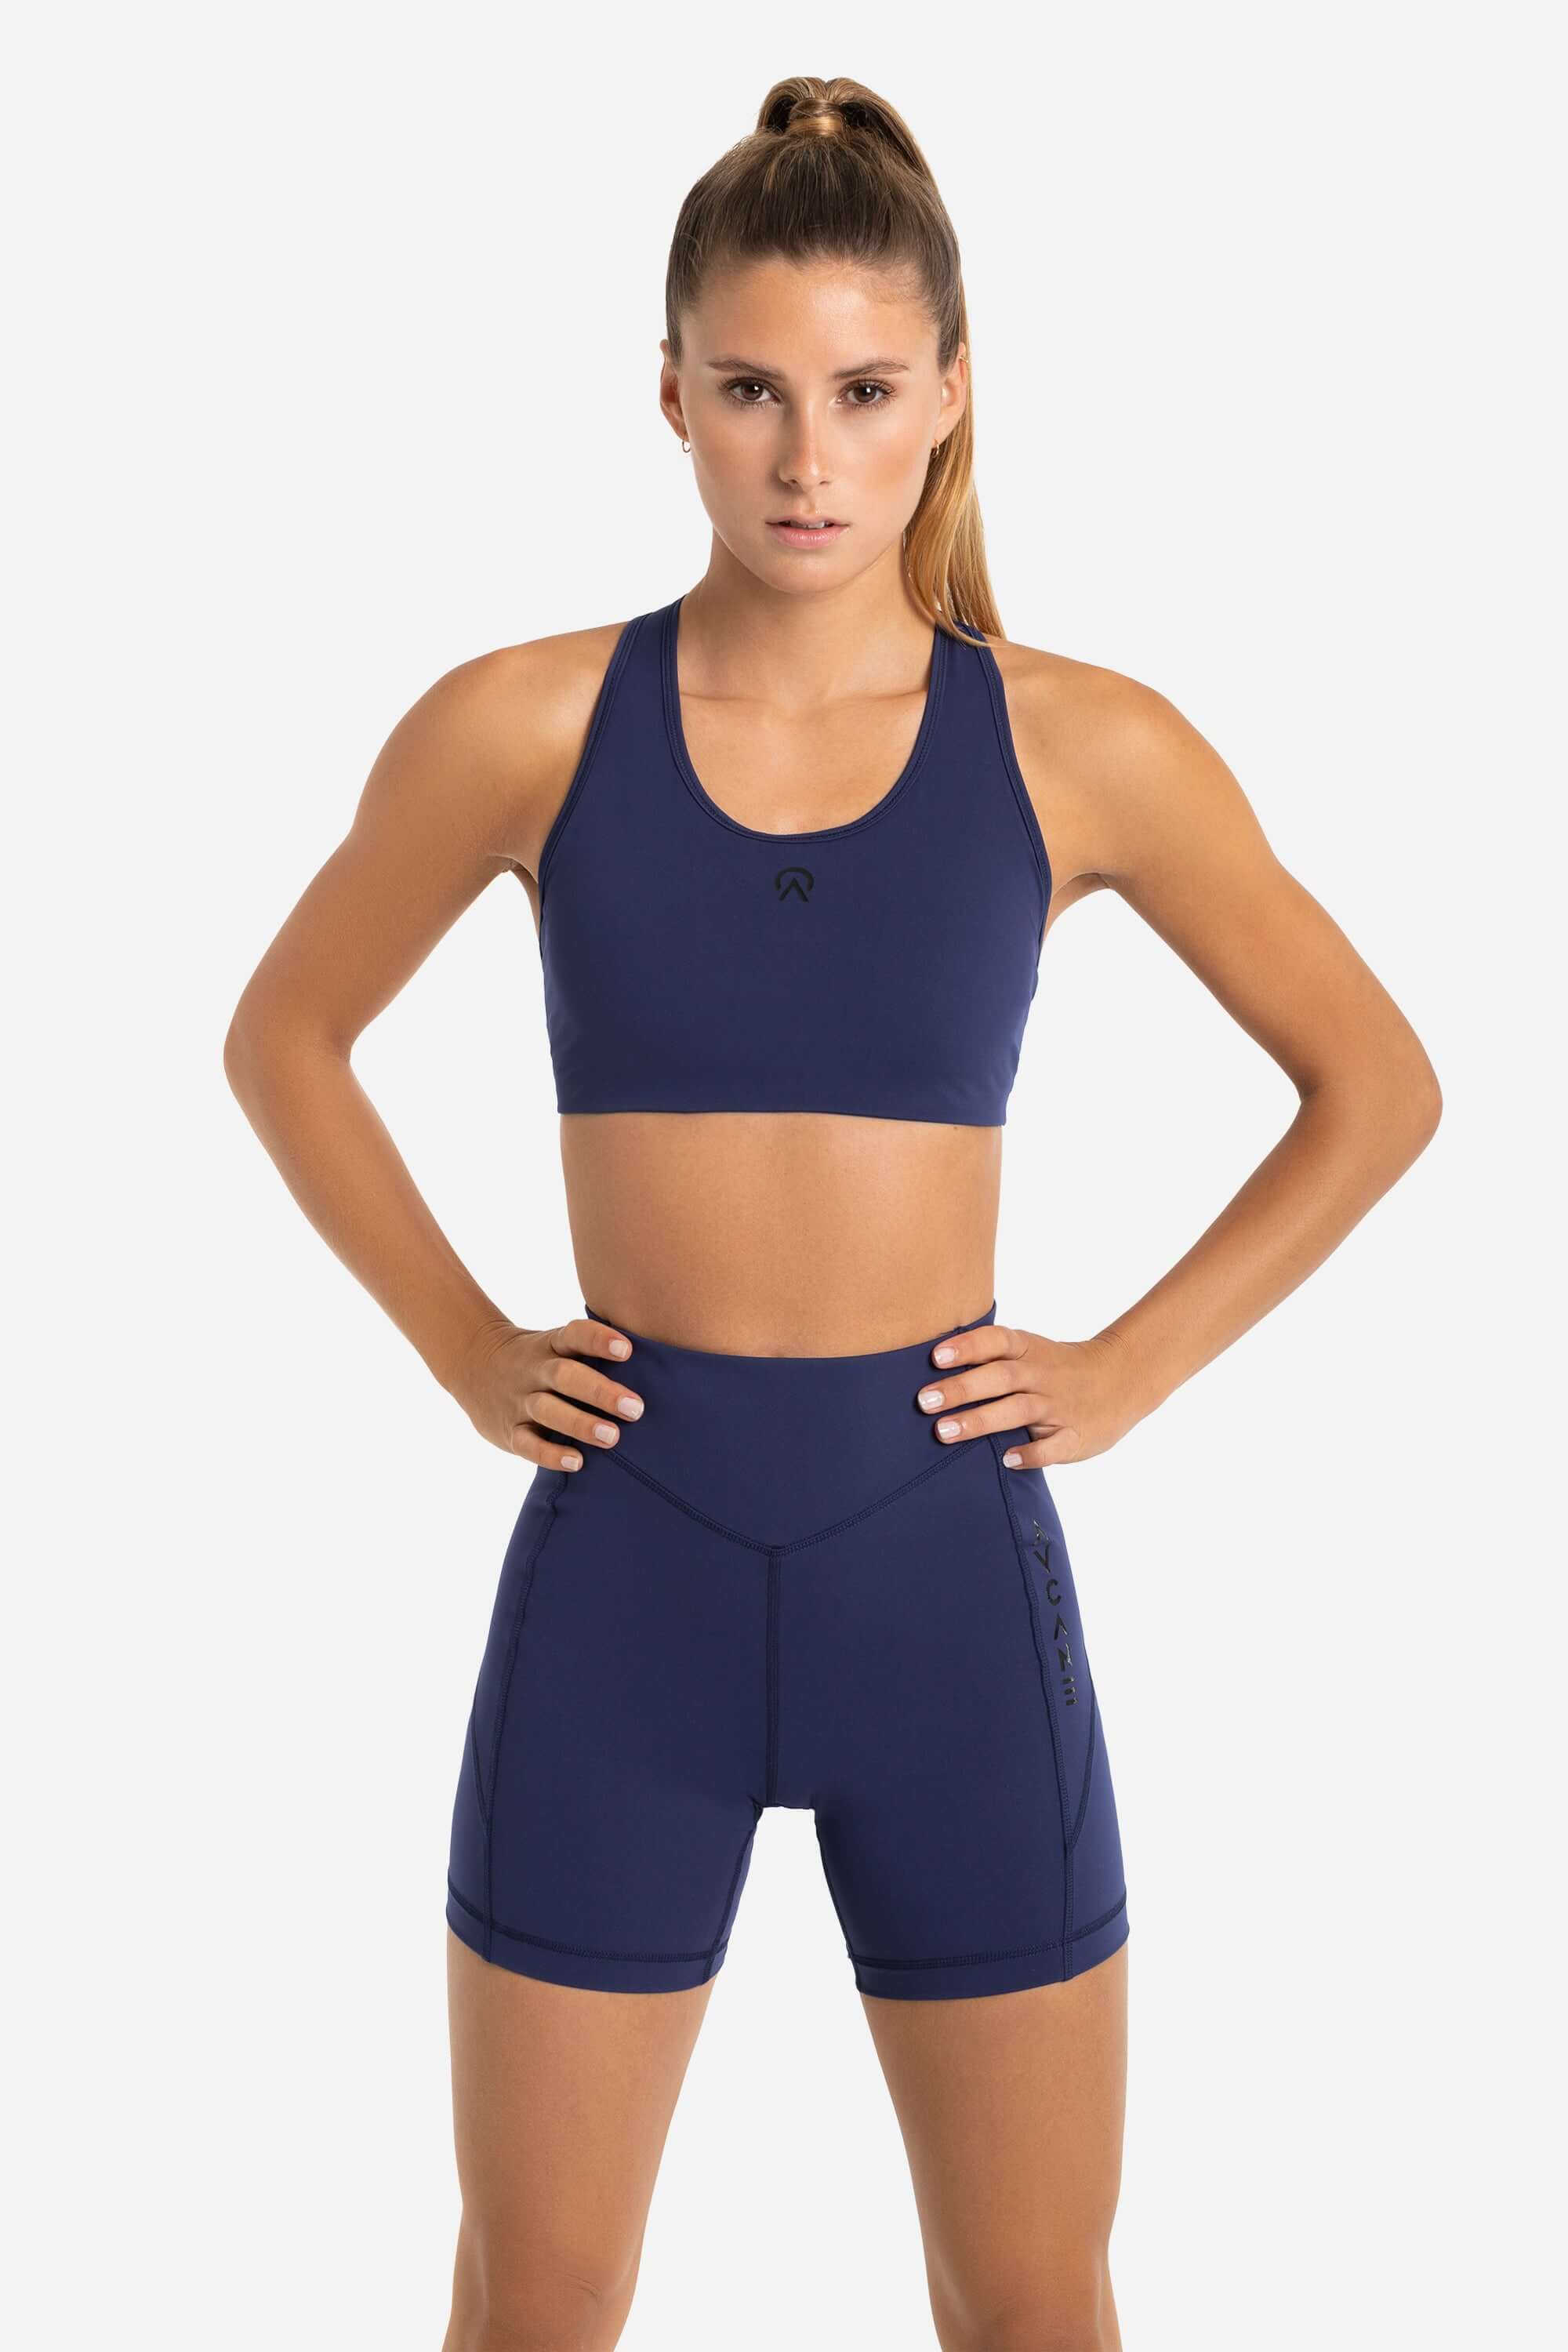 Women in a blue training sports bra and short tights